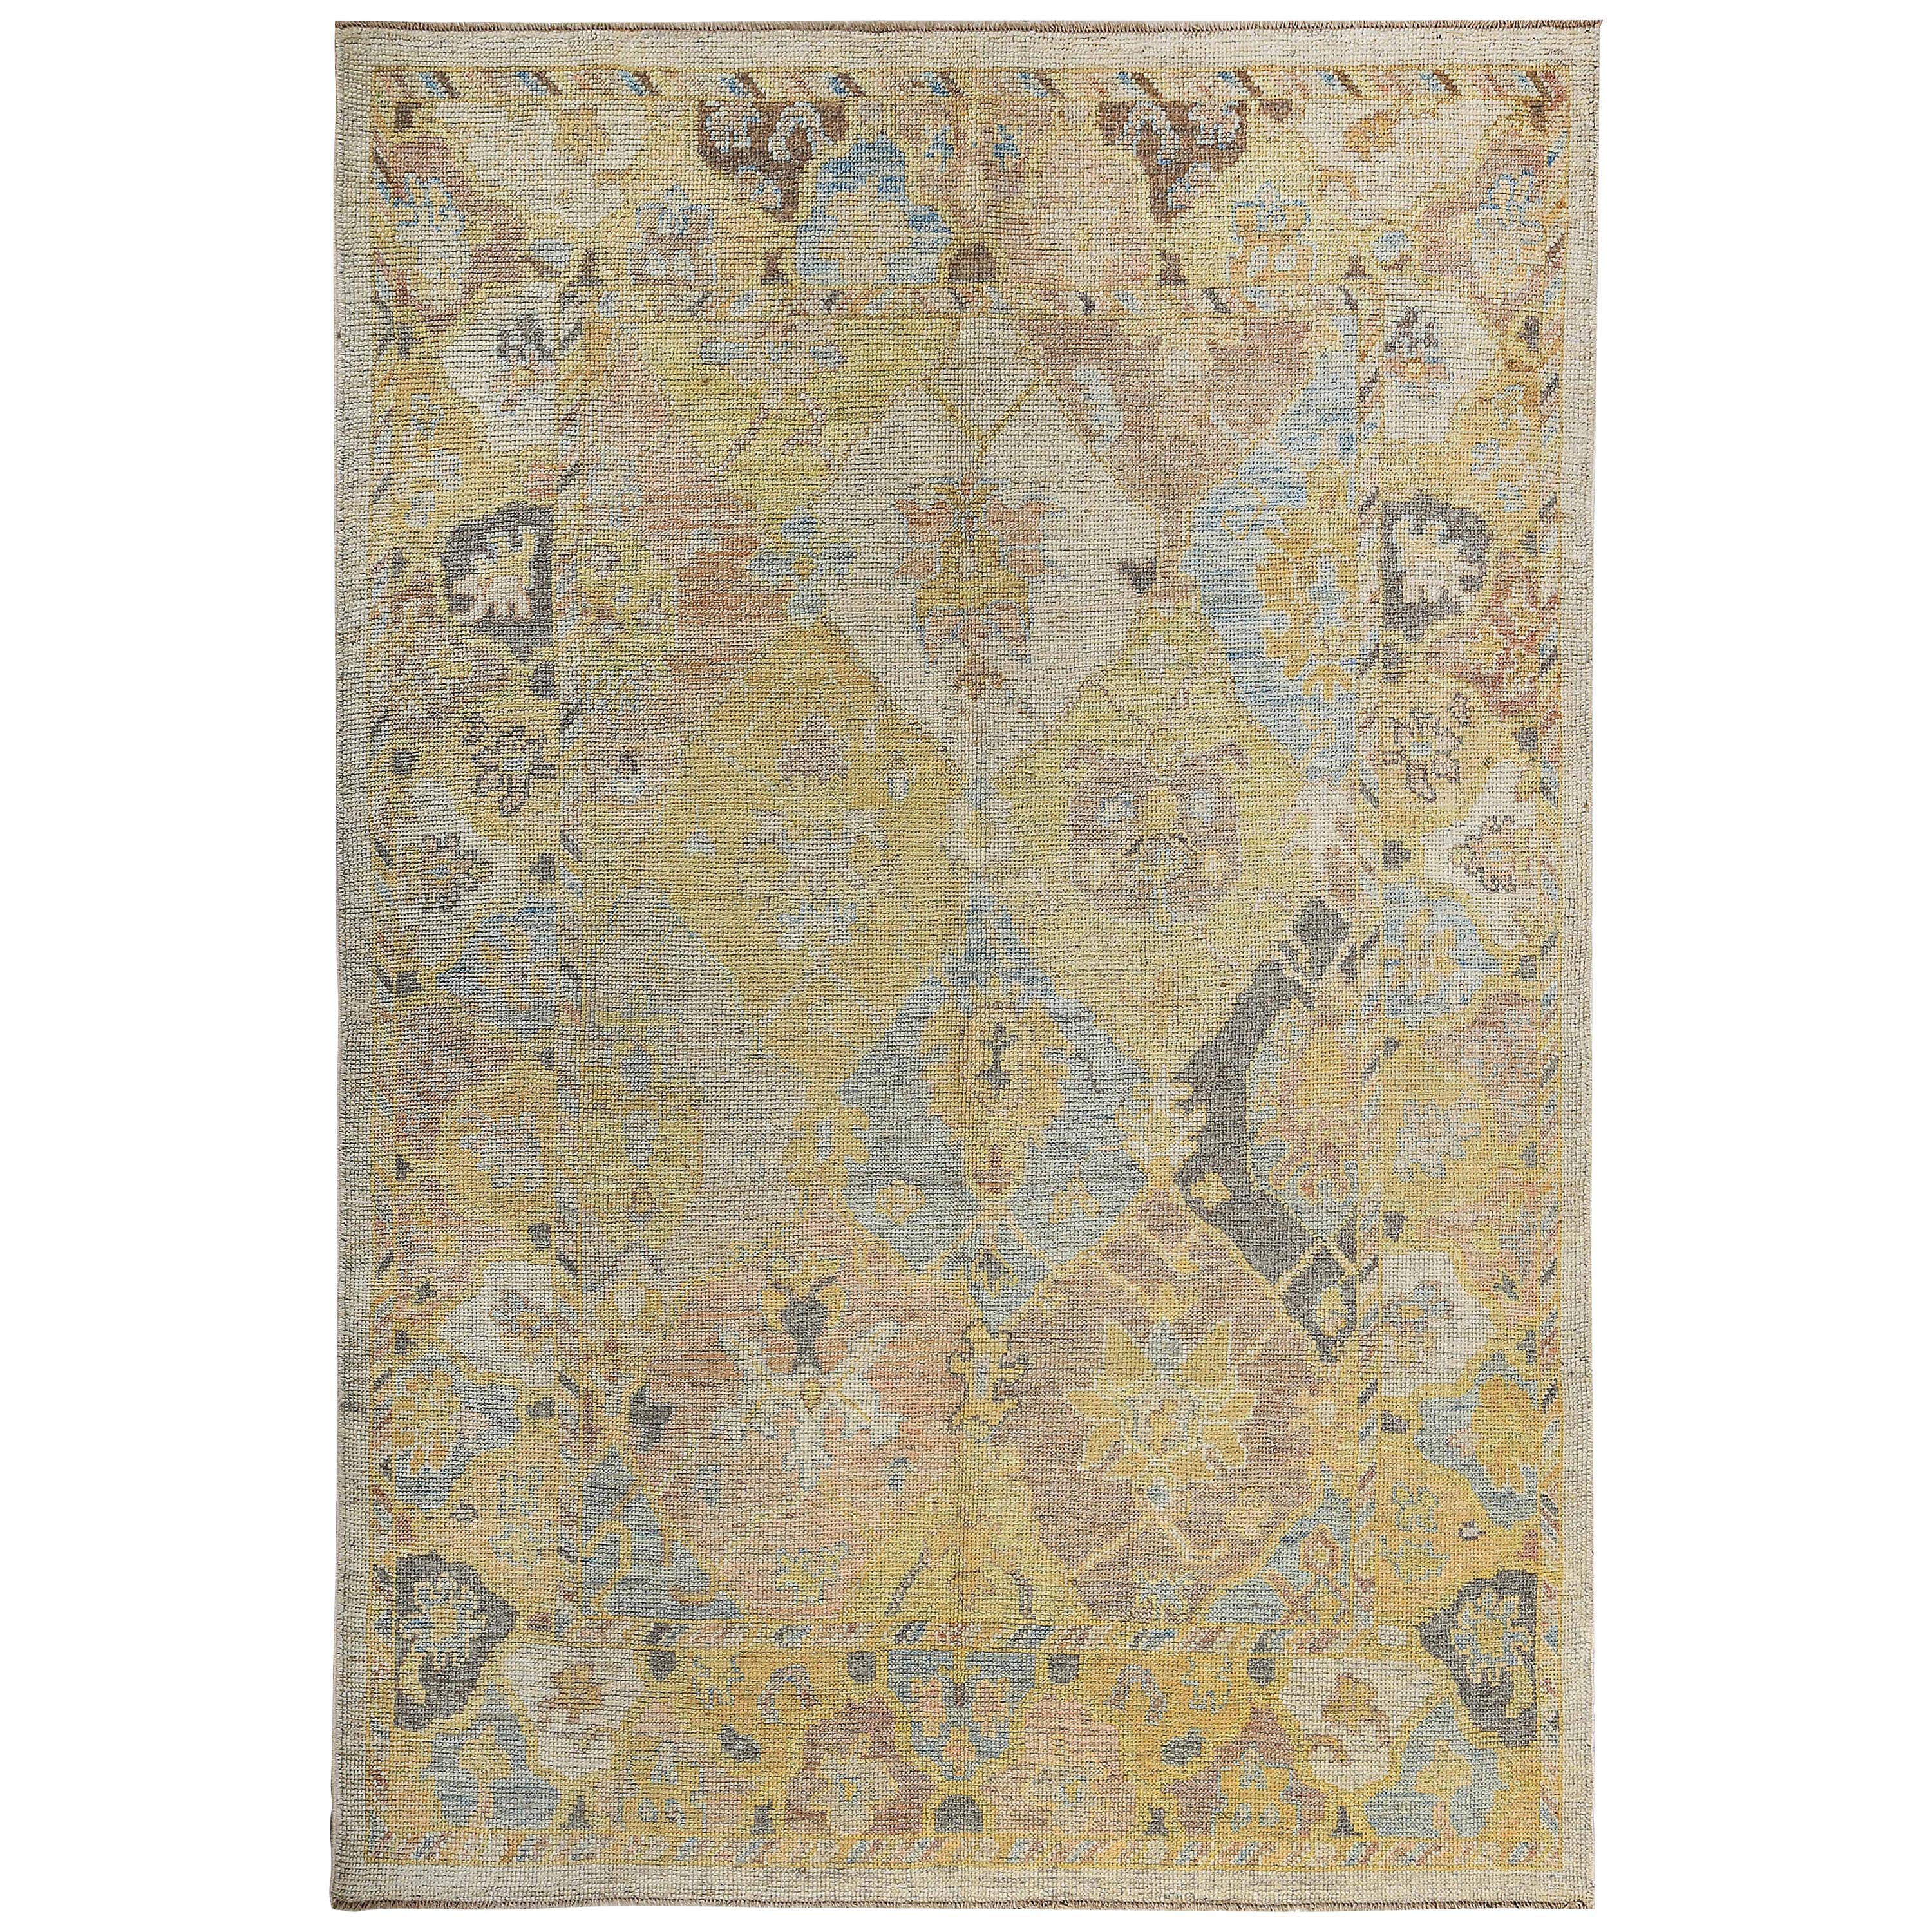 Turkish Oushak Rug with Brown and Gray Floral Details on Yellow and Ivory Field For Sale